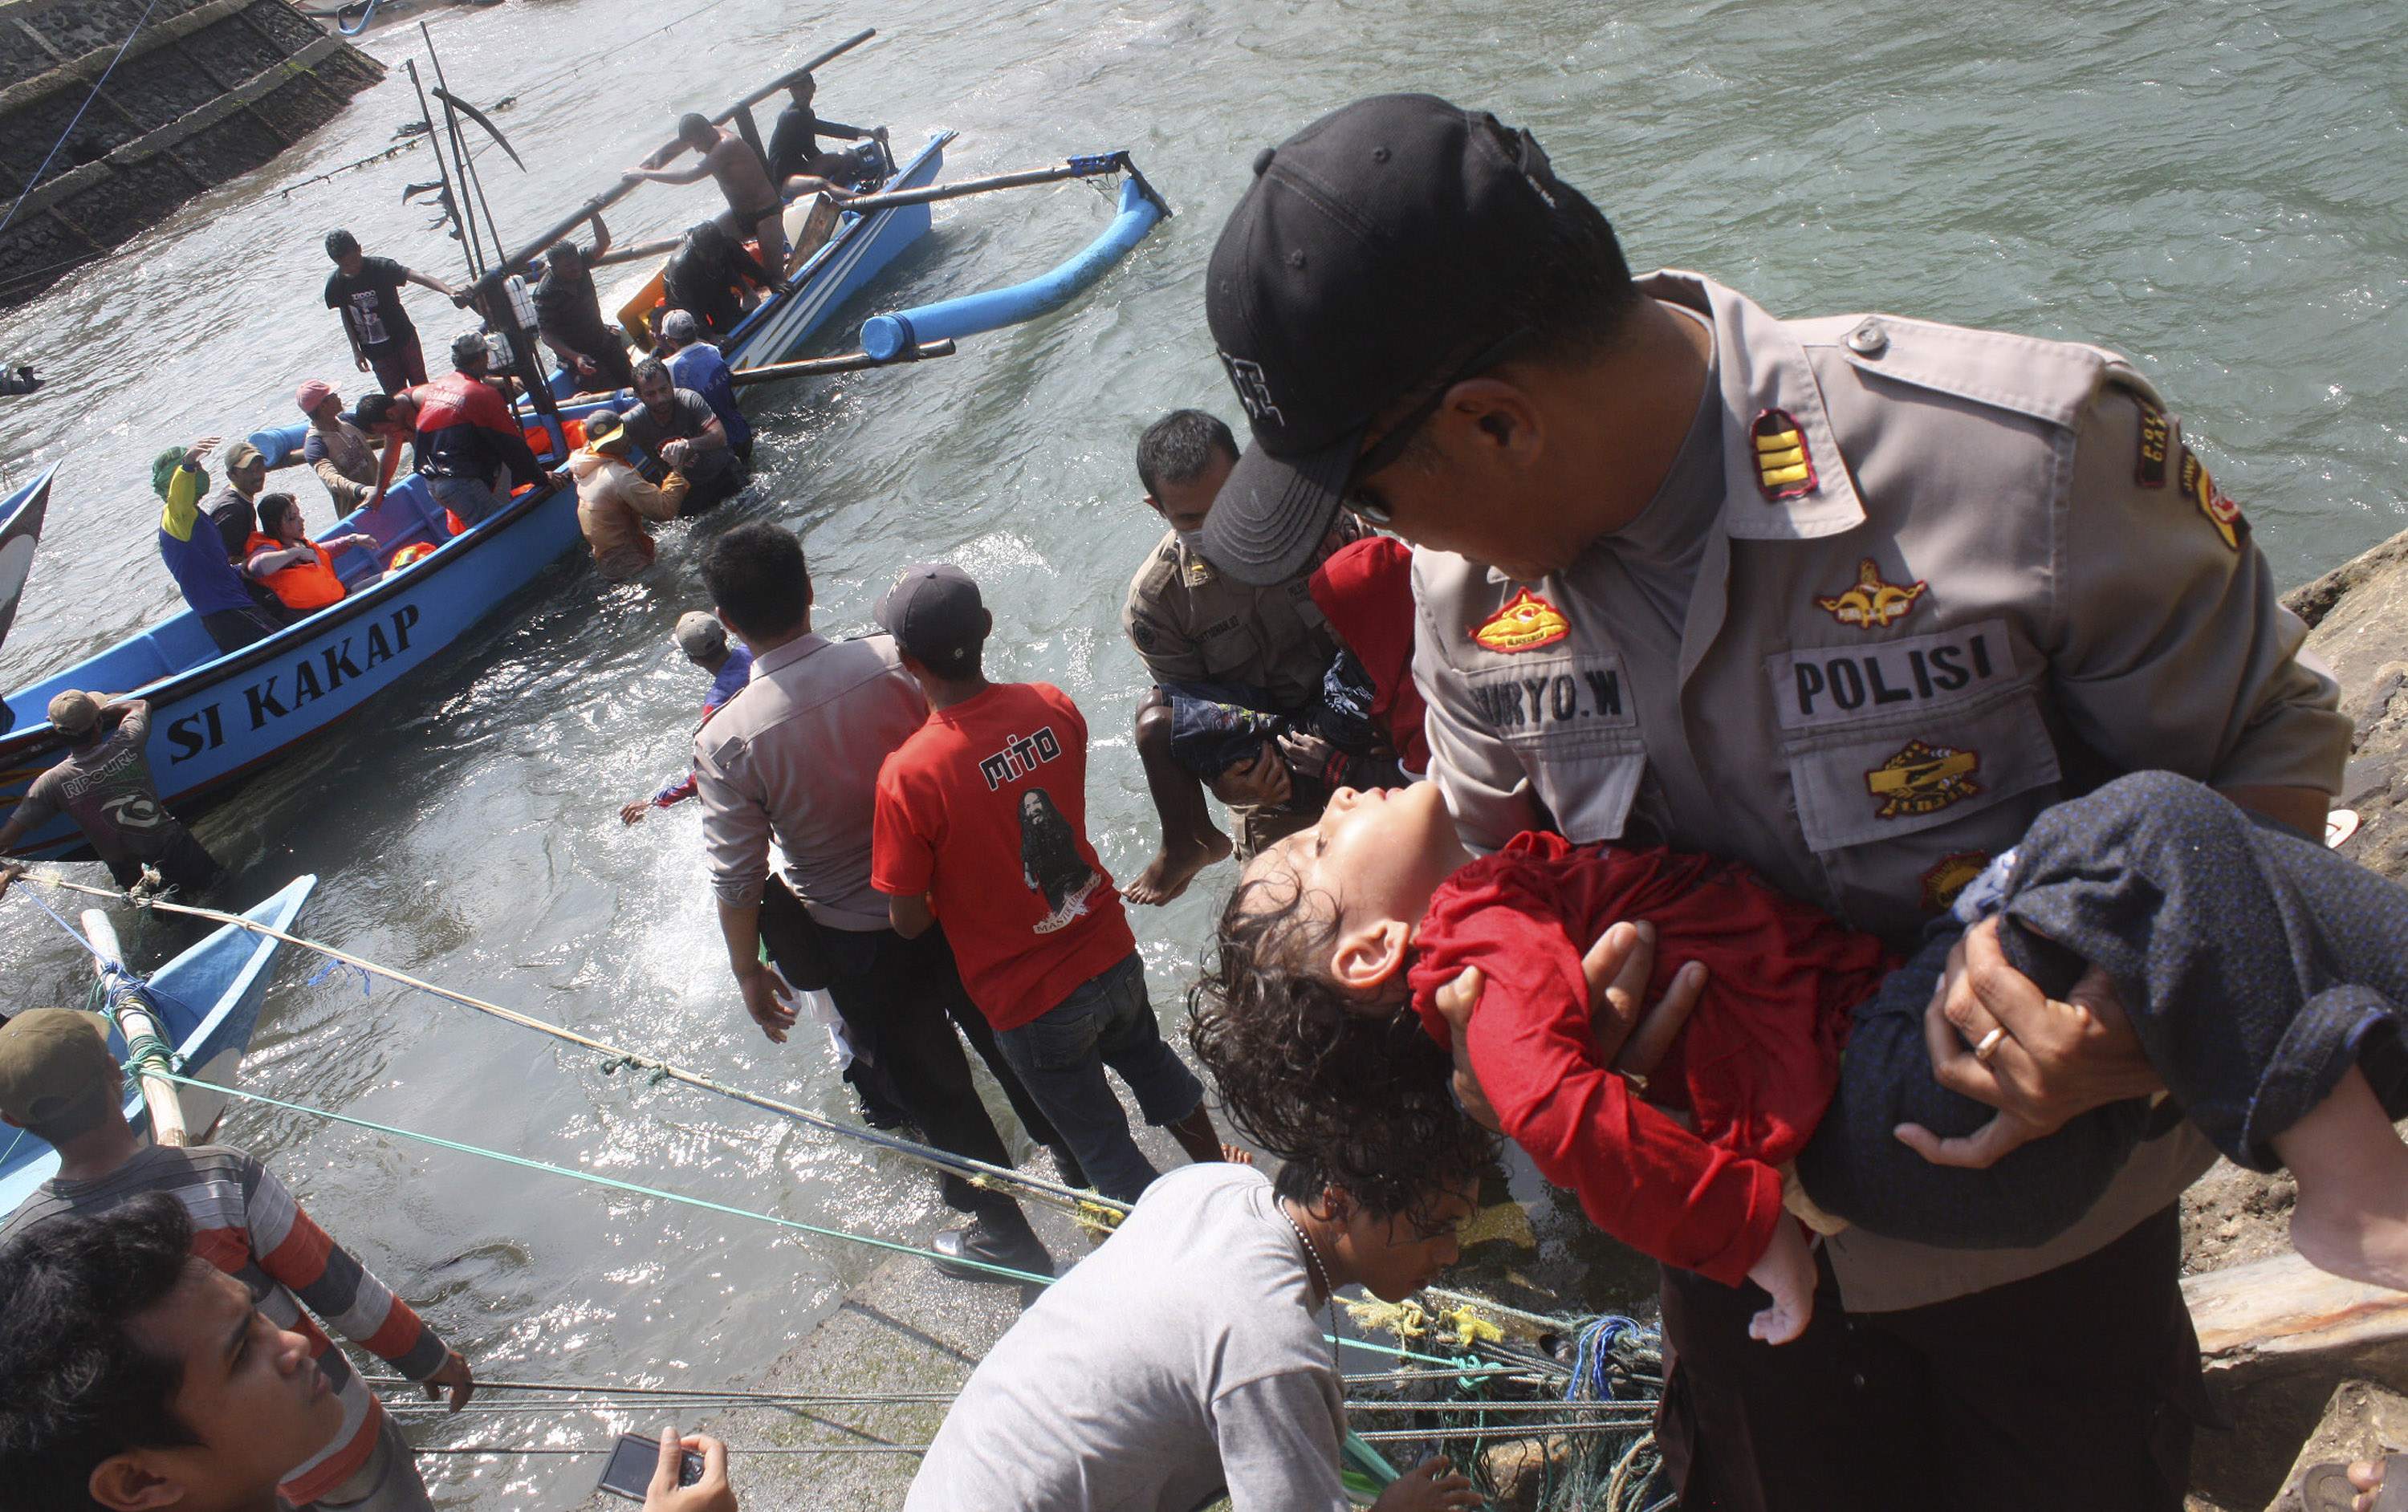 A police officer carries an unconscious child from the boat that capsized after hitting a reef off the coast of Sukapura, in Cianjur. Photo: Reuters